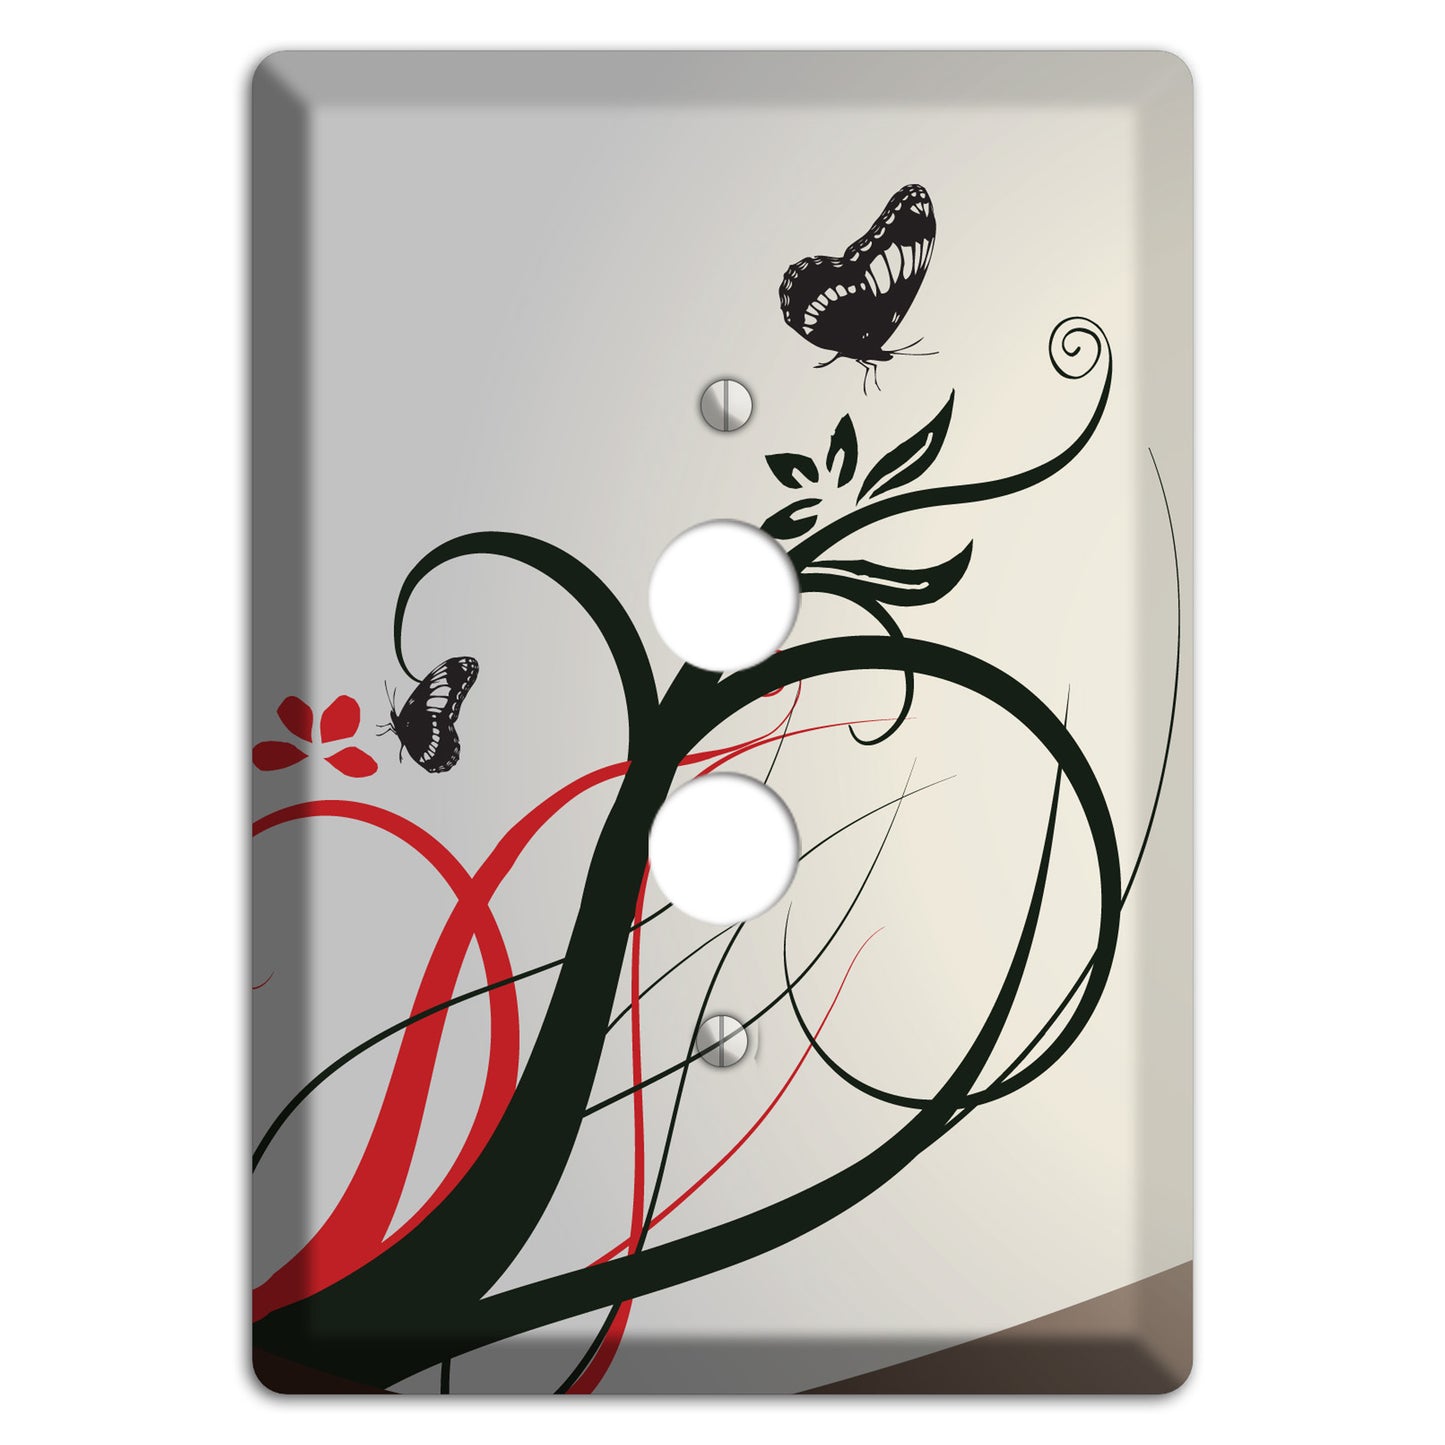 Grey and Red Floral Sprig with Butterfly 1 Pushbutton Wallplate